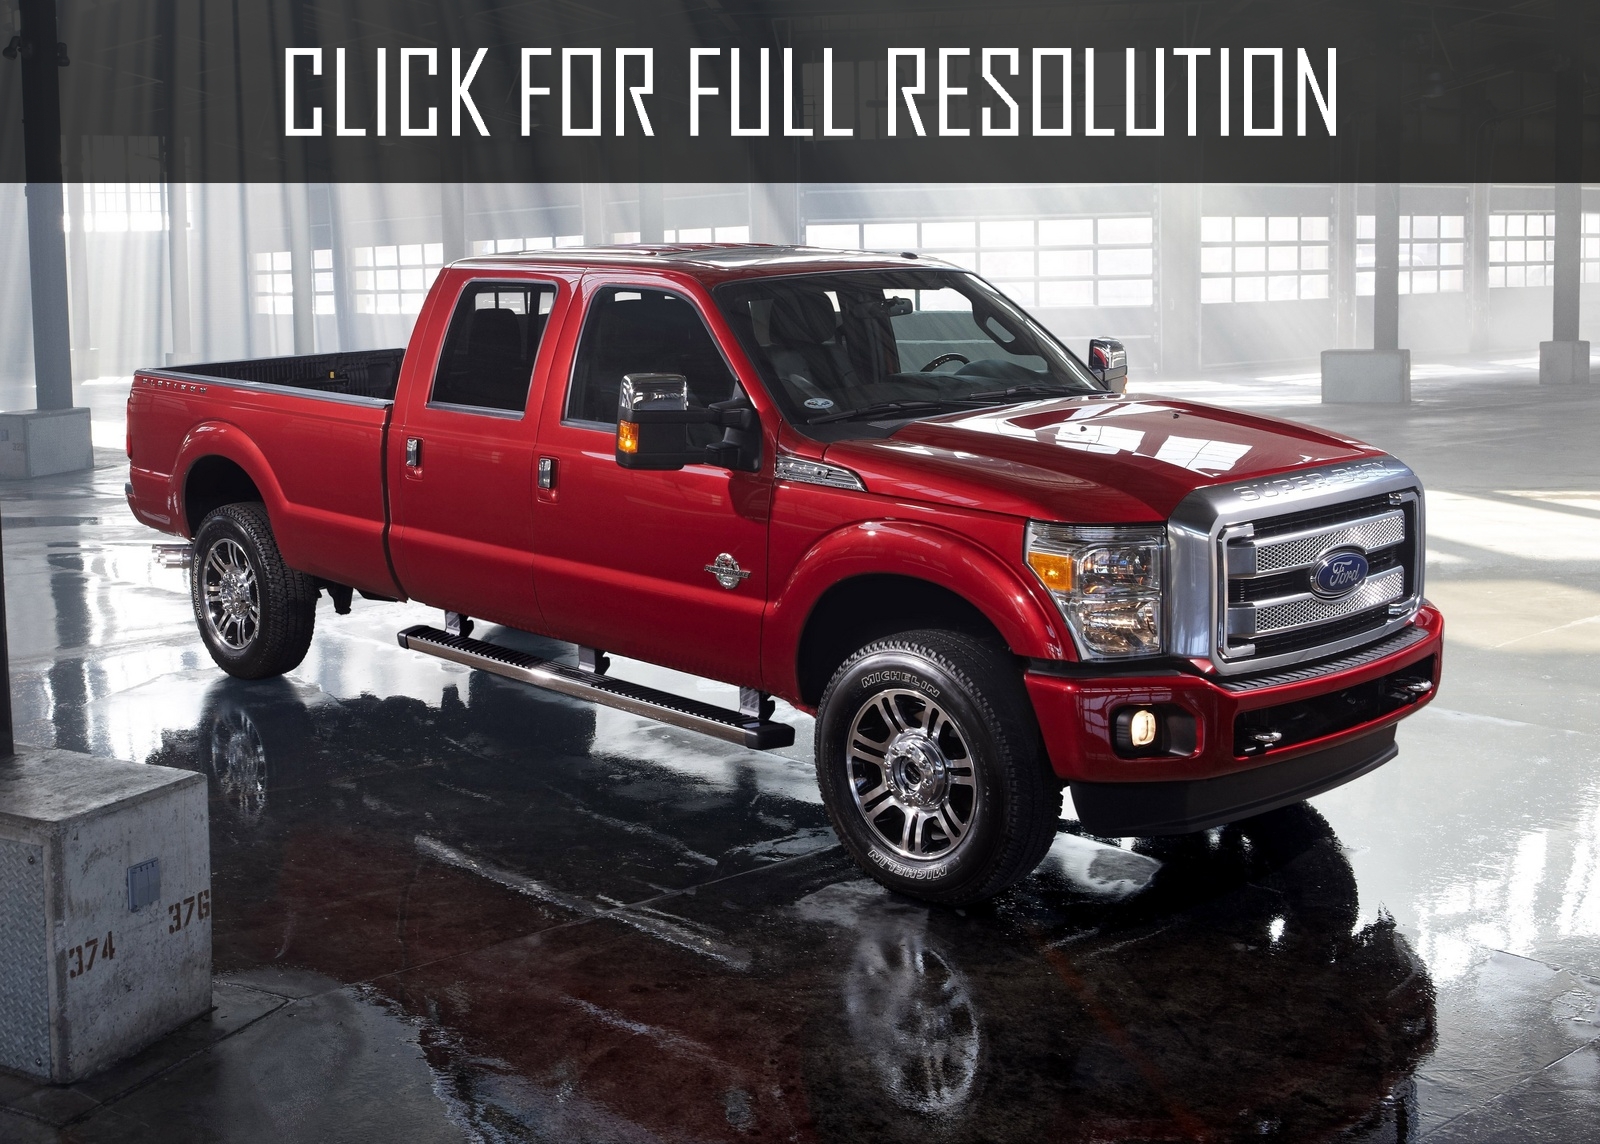 Ford Super Duty 2014